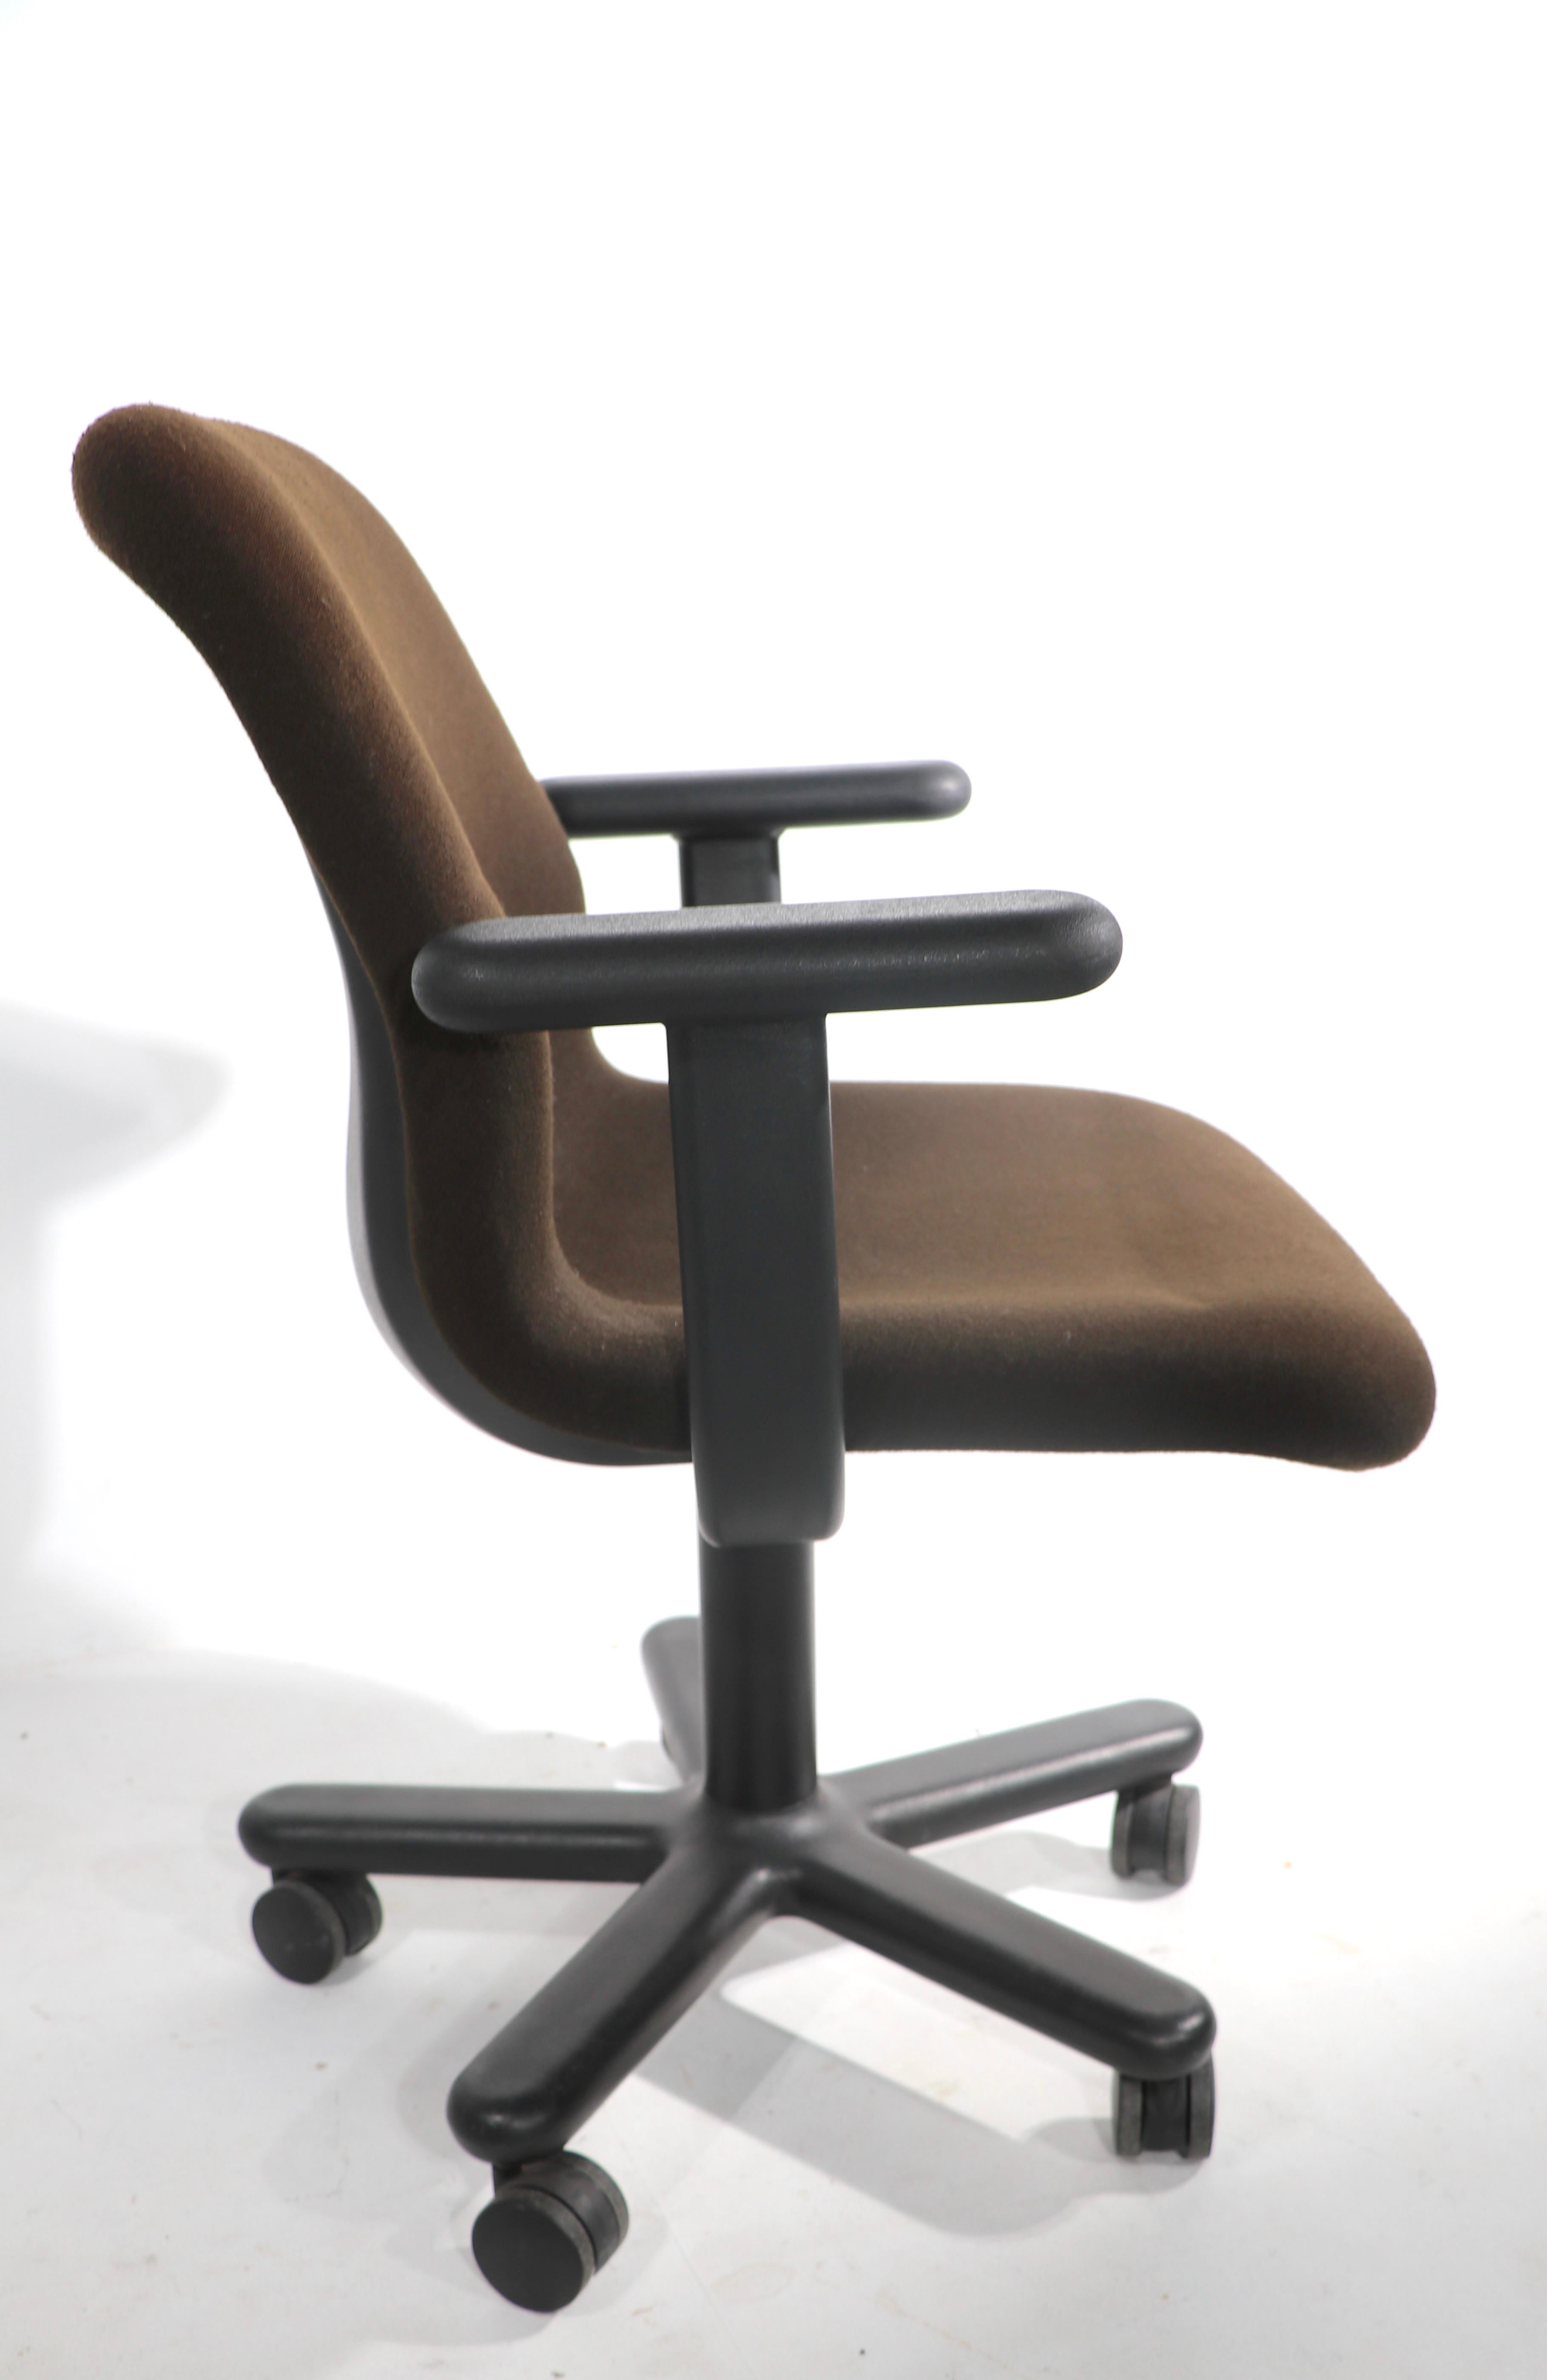 American Post Modern Knoll Swivel Desk, Office, Chairs 11 Available For Sale